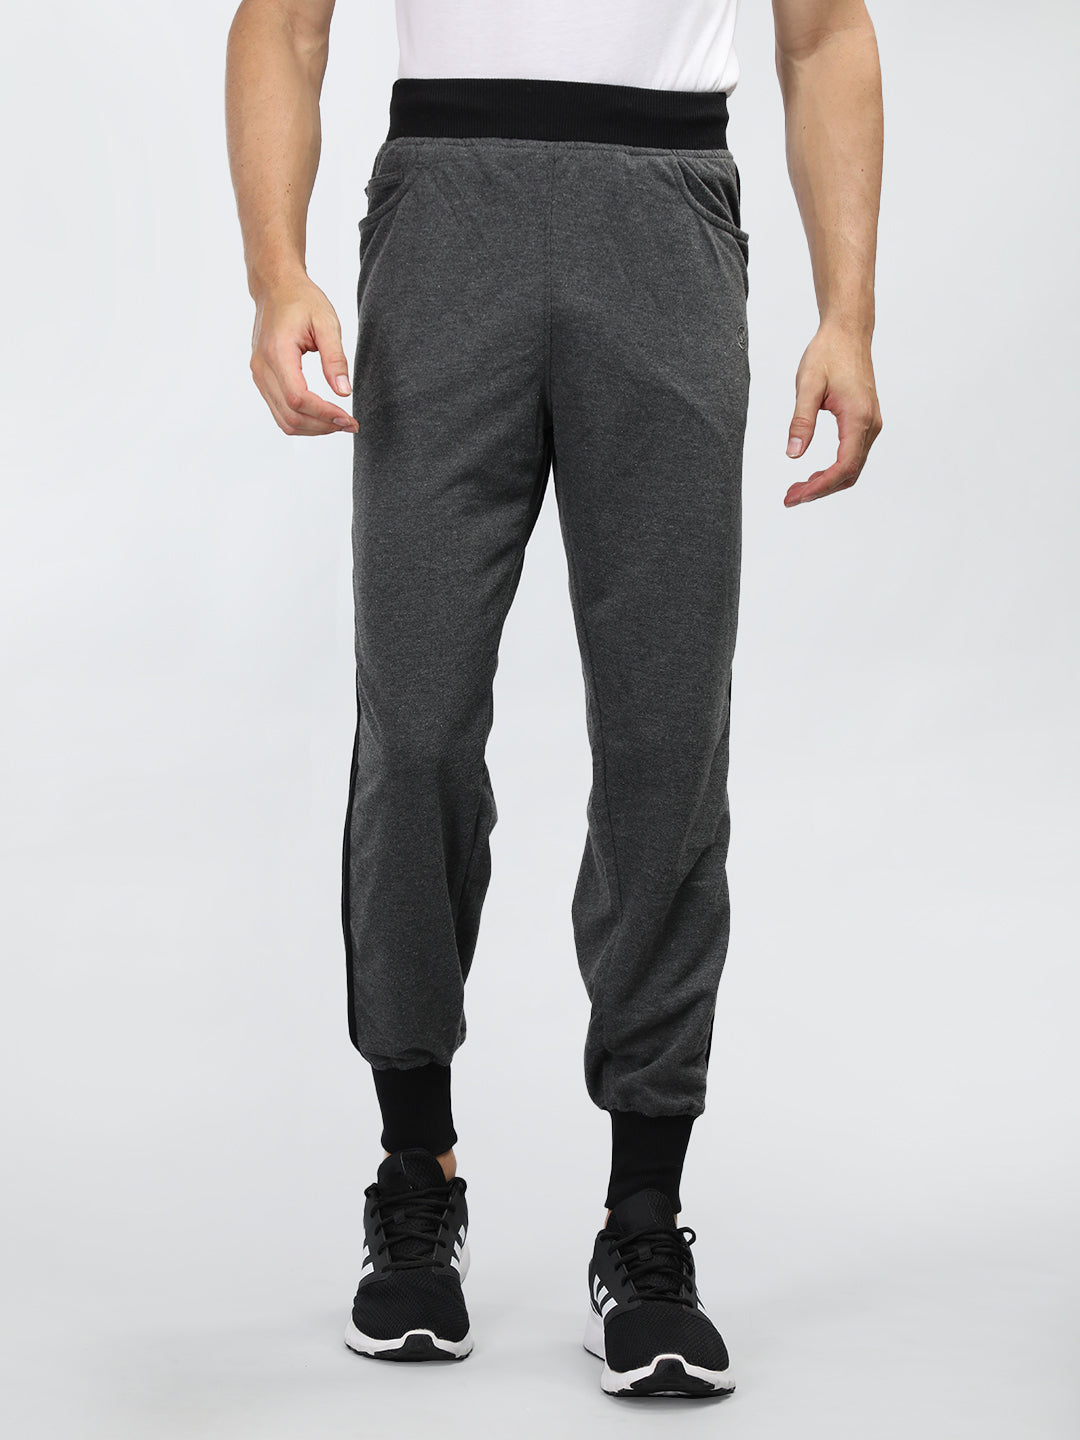 CHKOKKO Men Casual Track Pant Workout Lower with Pocket